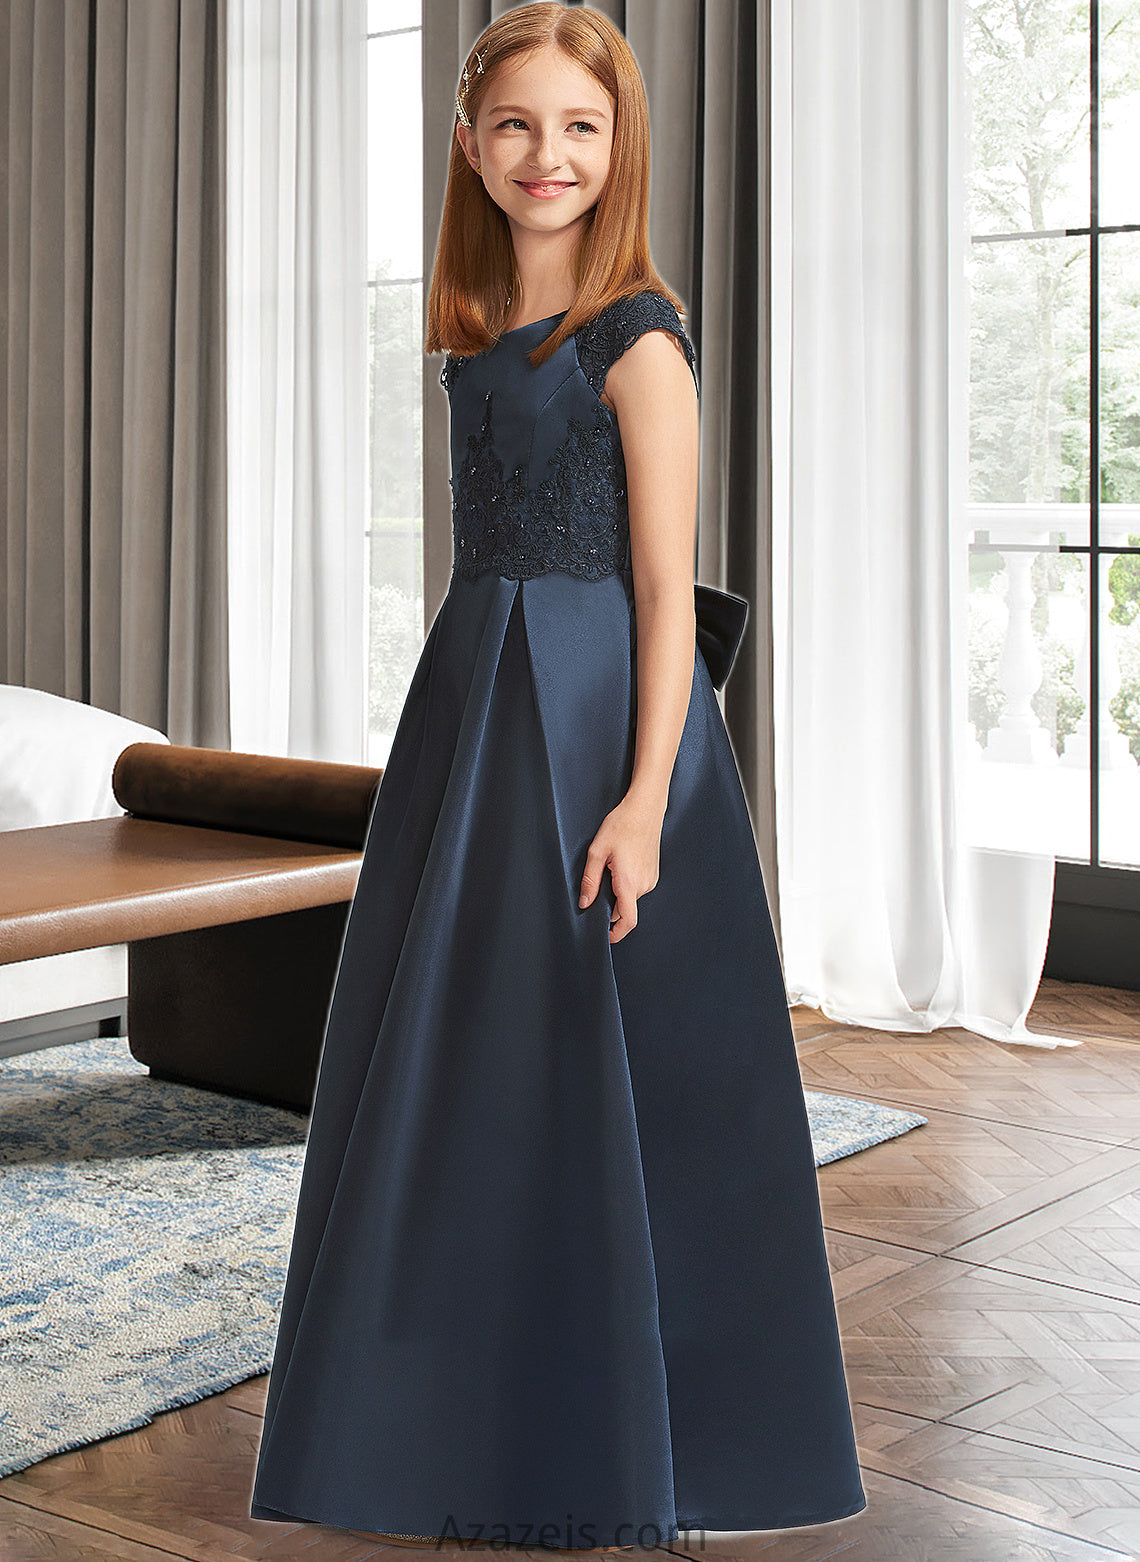 Nellie A-Line Scoop Neck Floor-Length Satin Lace Junior Bridesmaid Dress With Beading Sequins Bow(s) DFP0013574